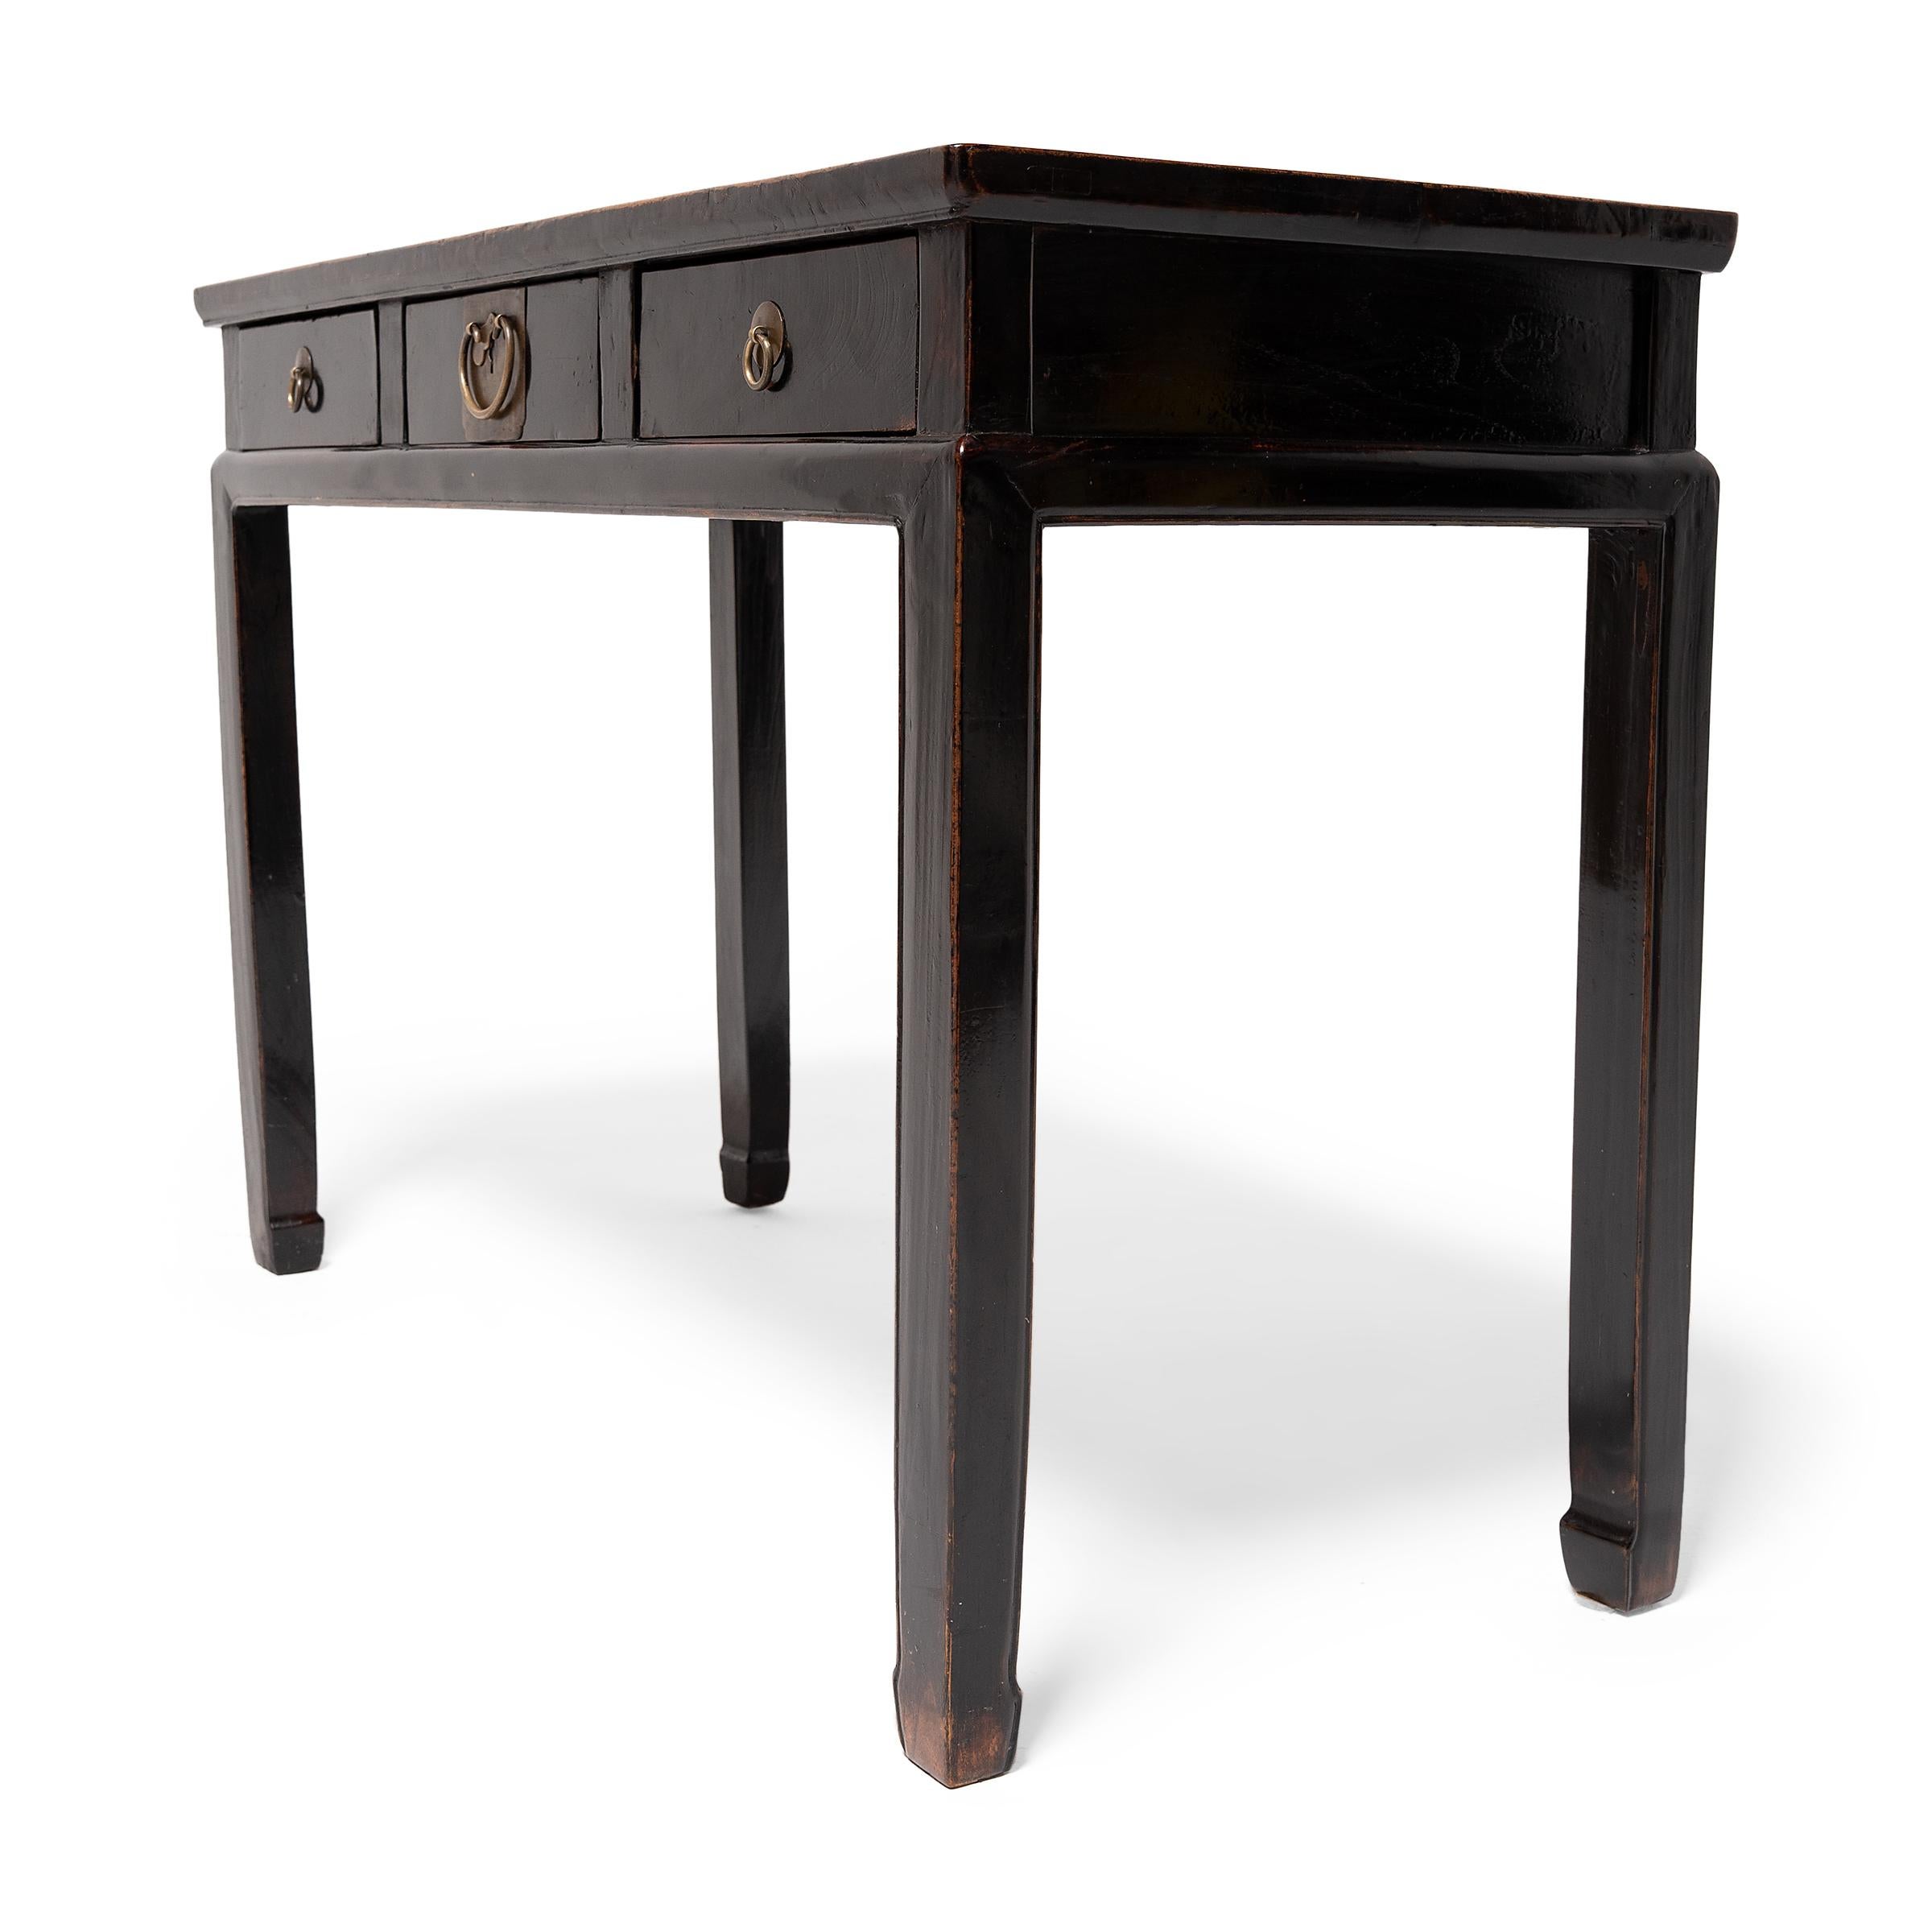 Elm Chinese Black Lacquer Writing Desk, C. 1850